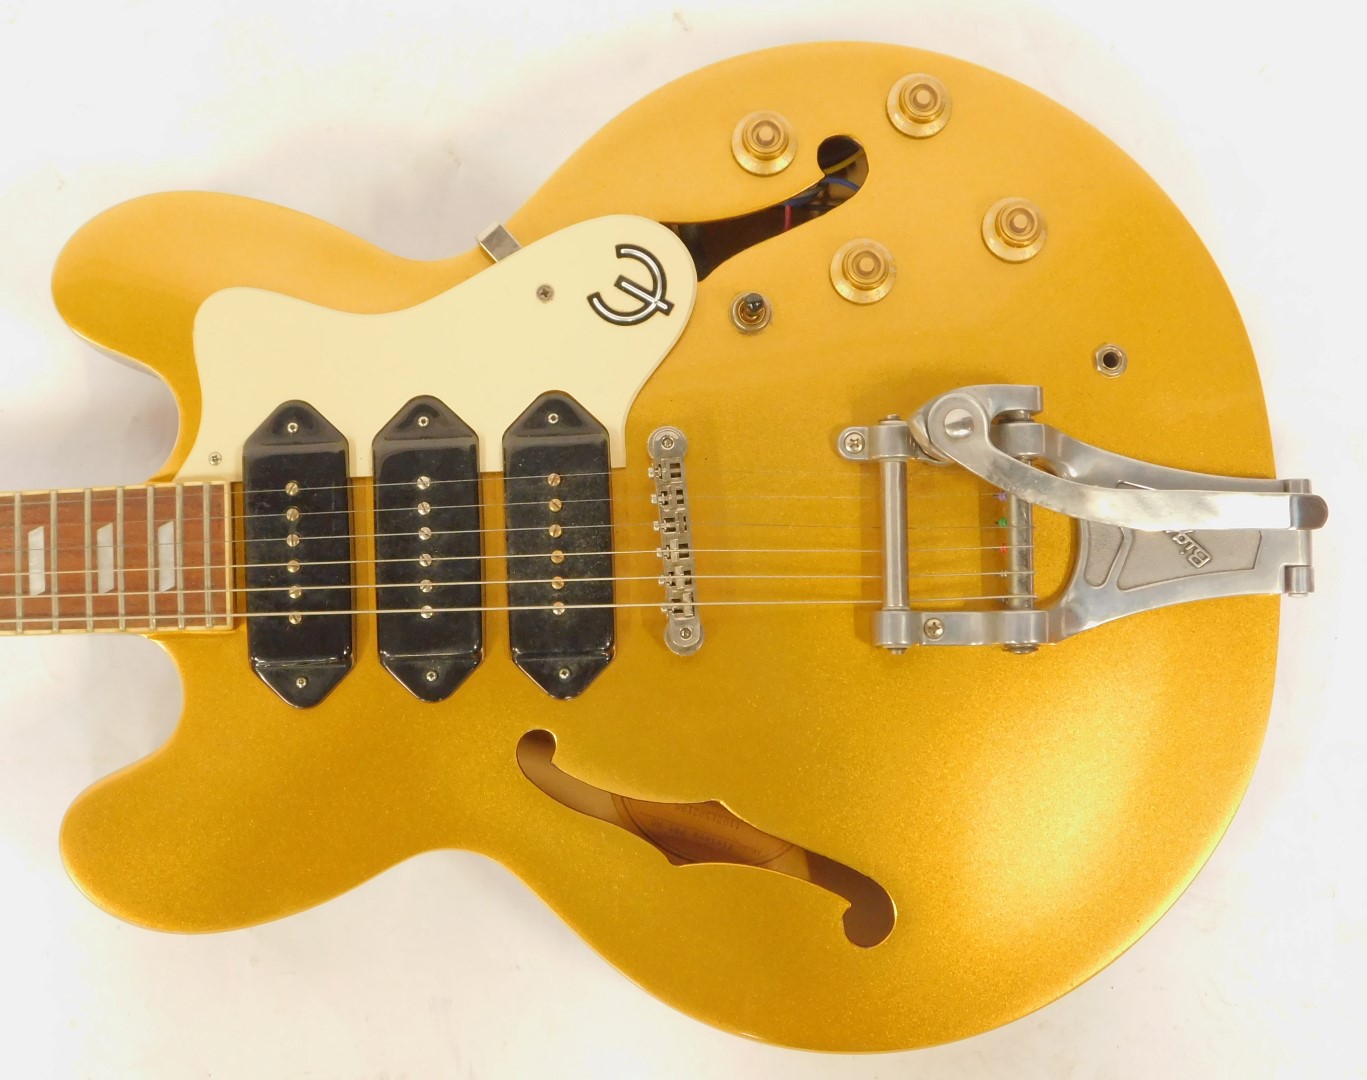 An Epiphone Riviera P93 MG electric guitar, serial number 11021502198, the body in gold coloured - Image 2 of 13